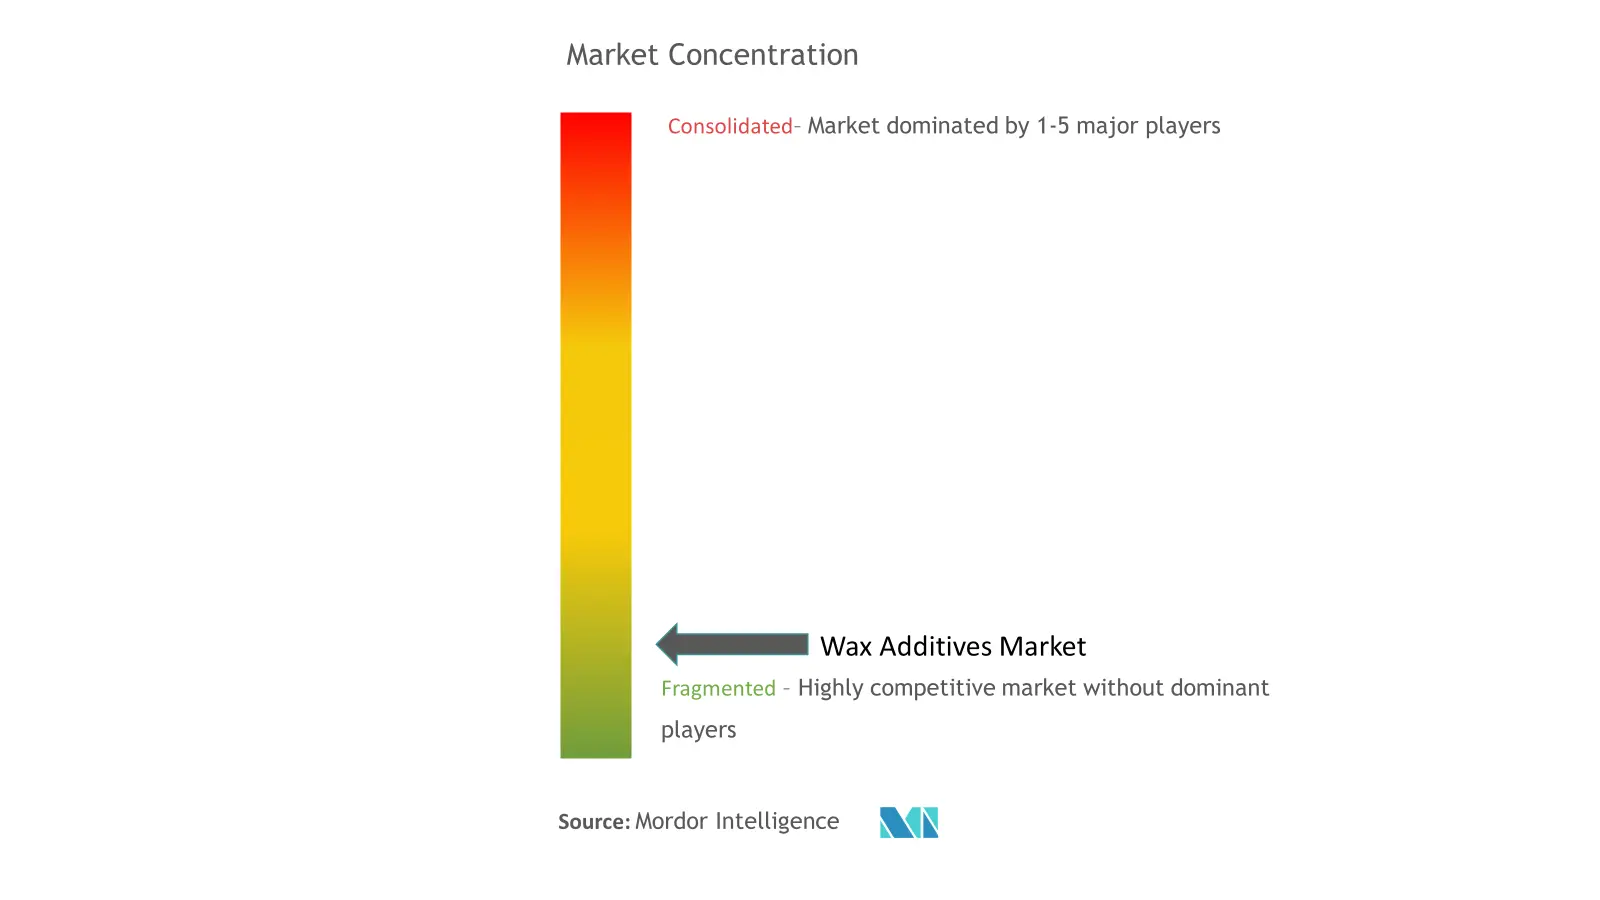 Wax Additives Market Concentration